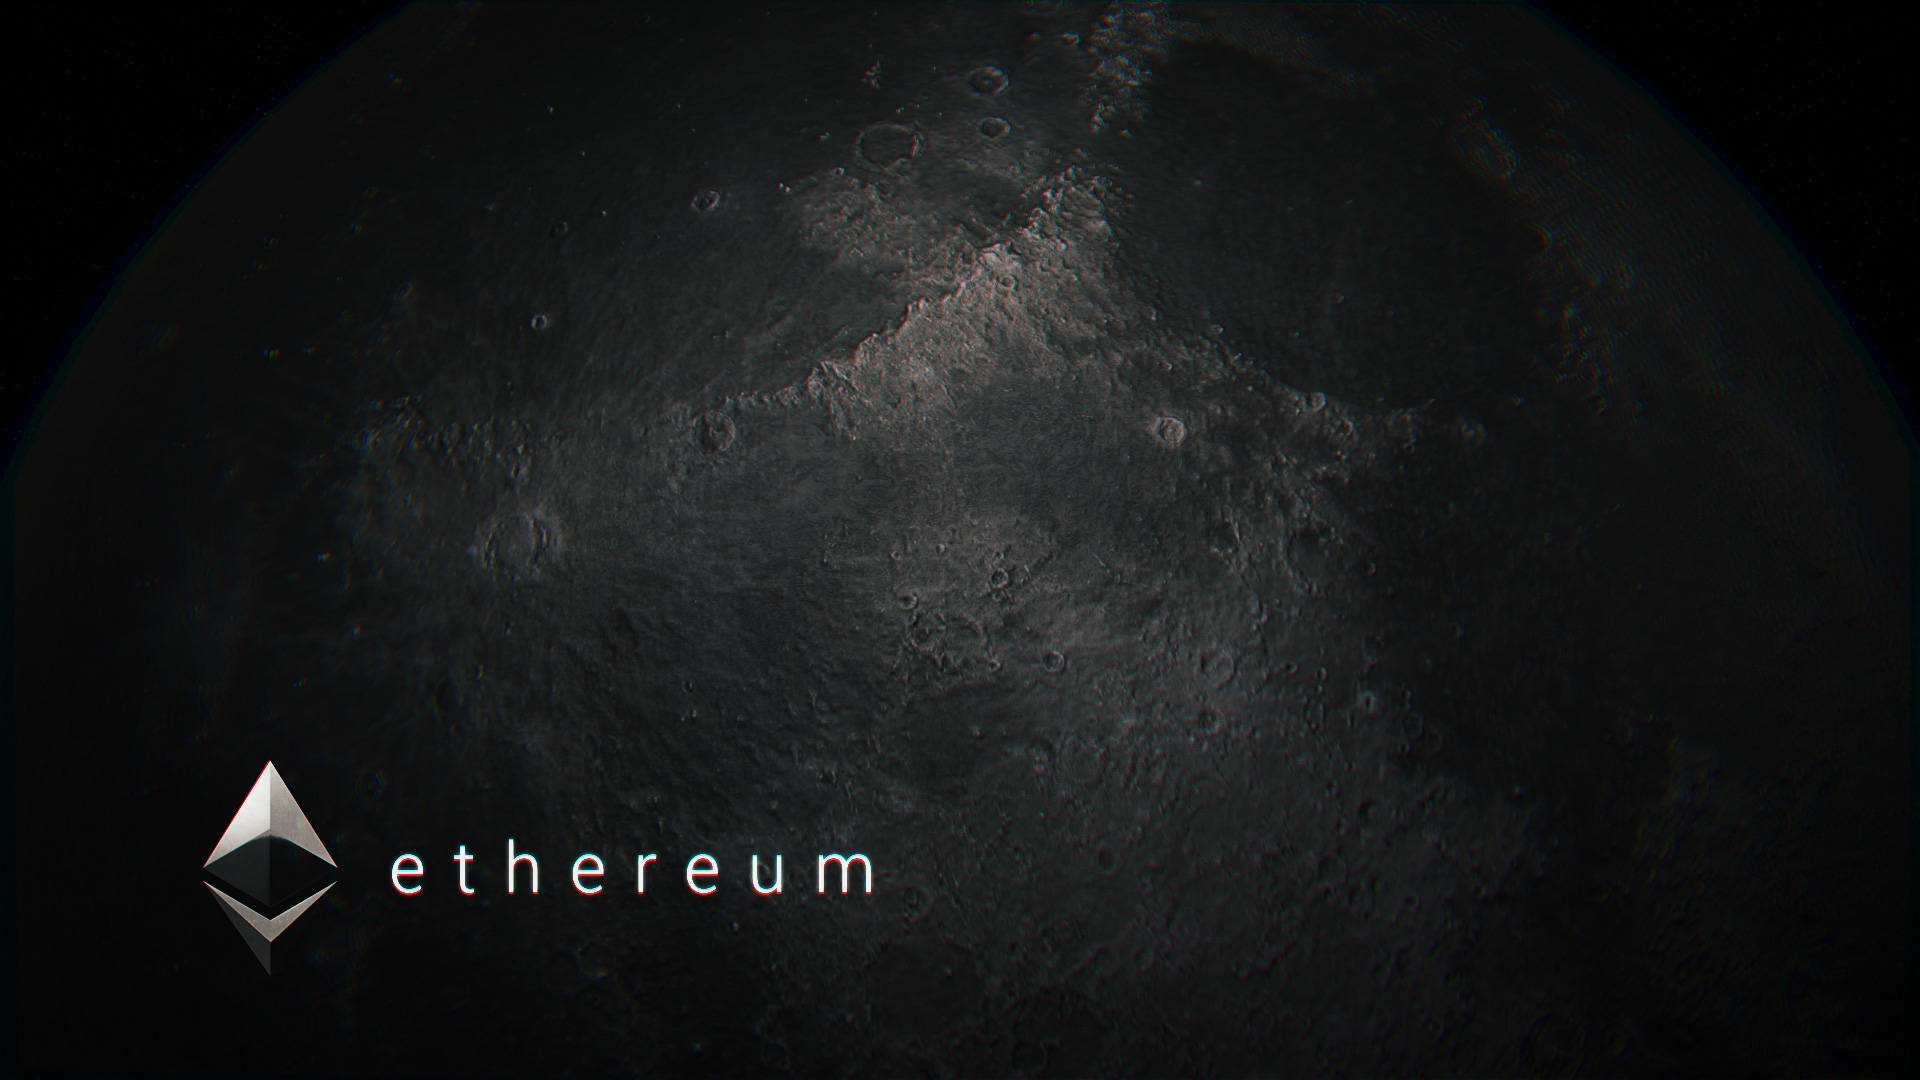 Ethereum And Moon